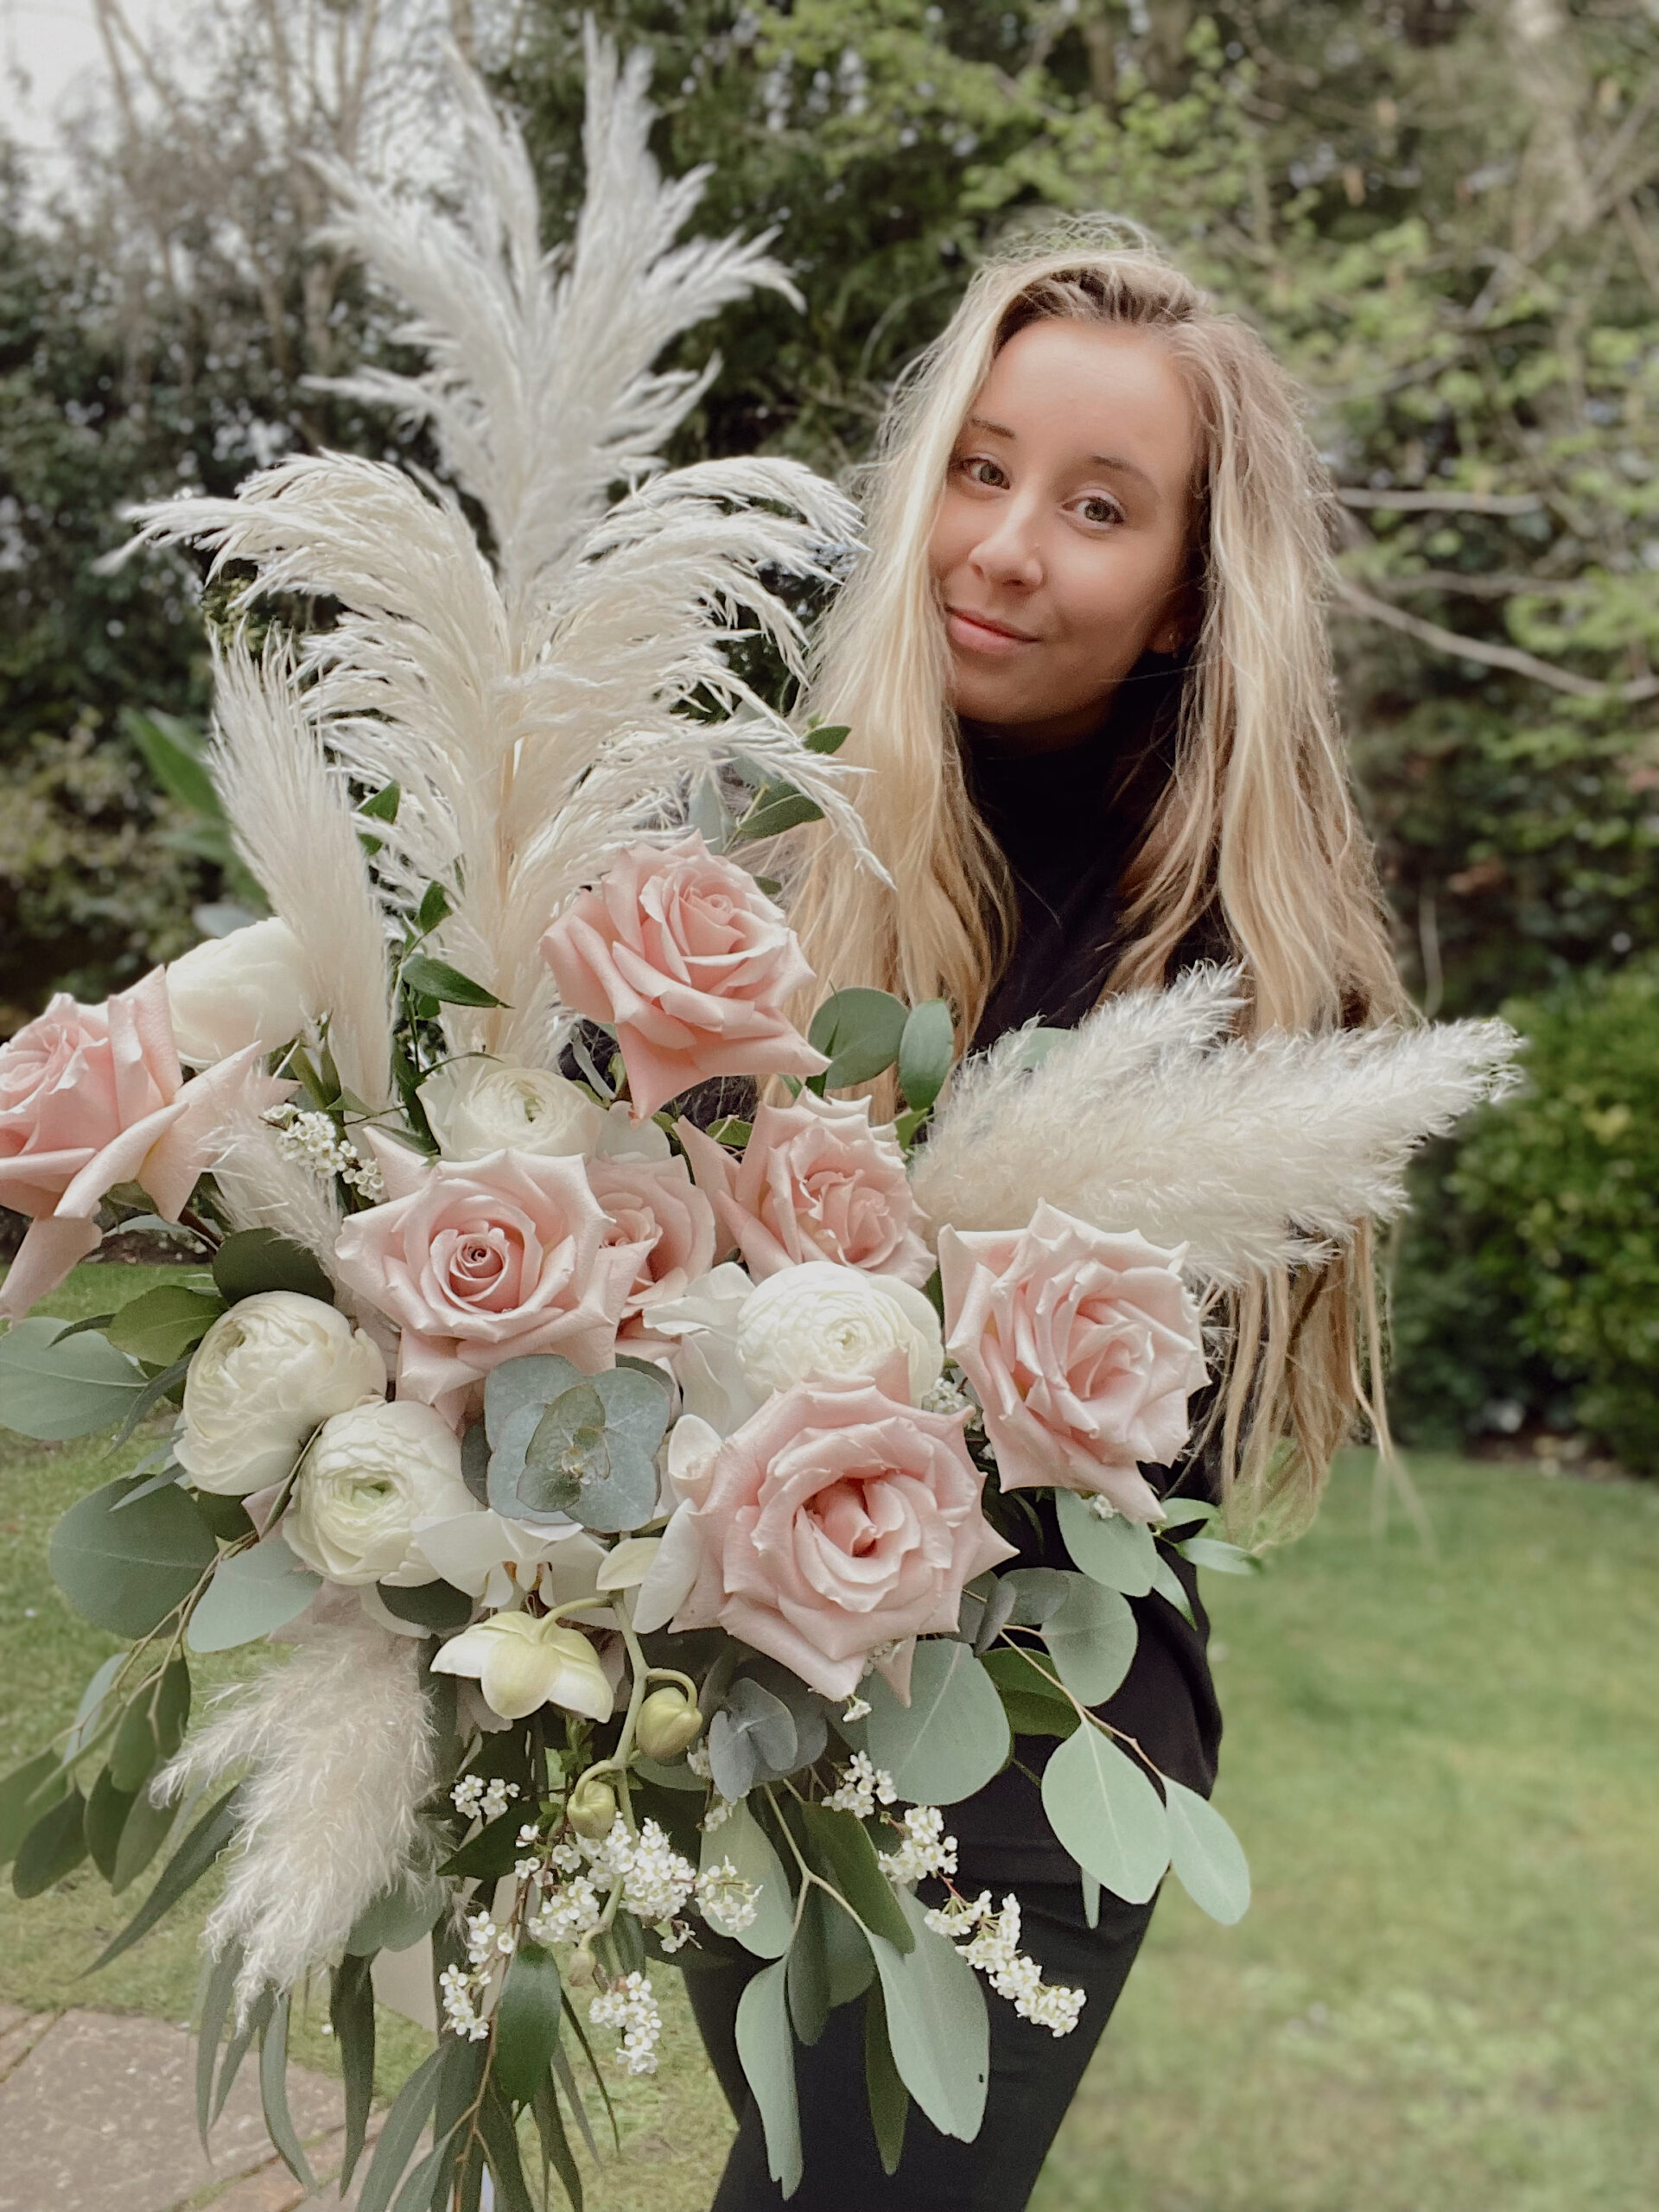 Steph Lovell Flowers - Event & Occasion Flowers